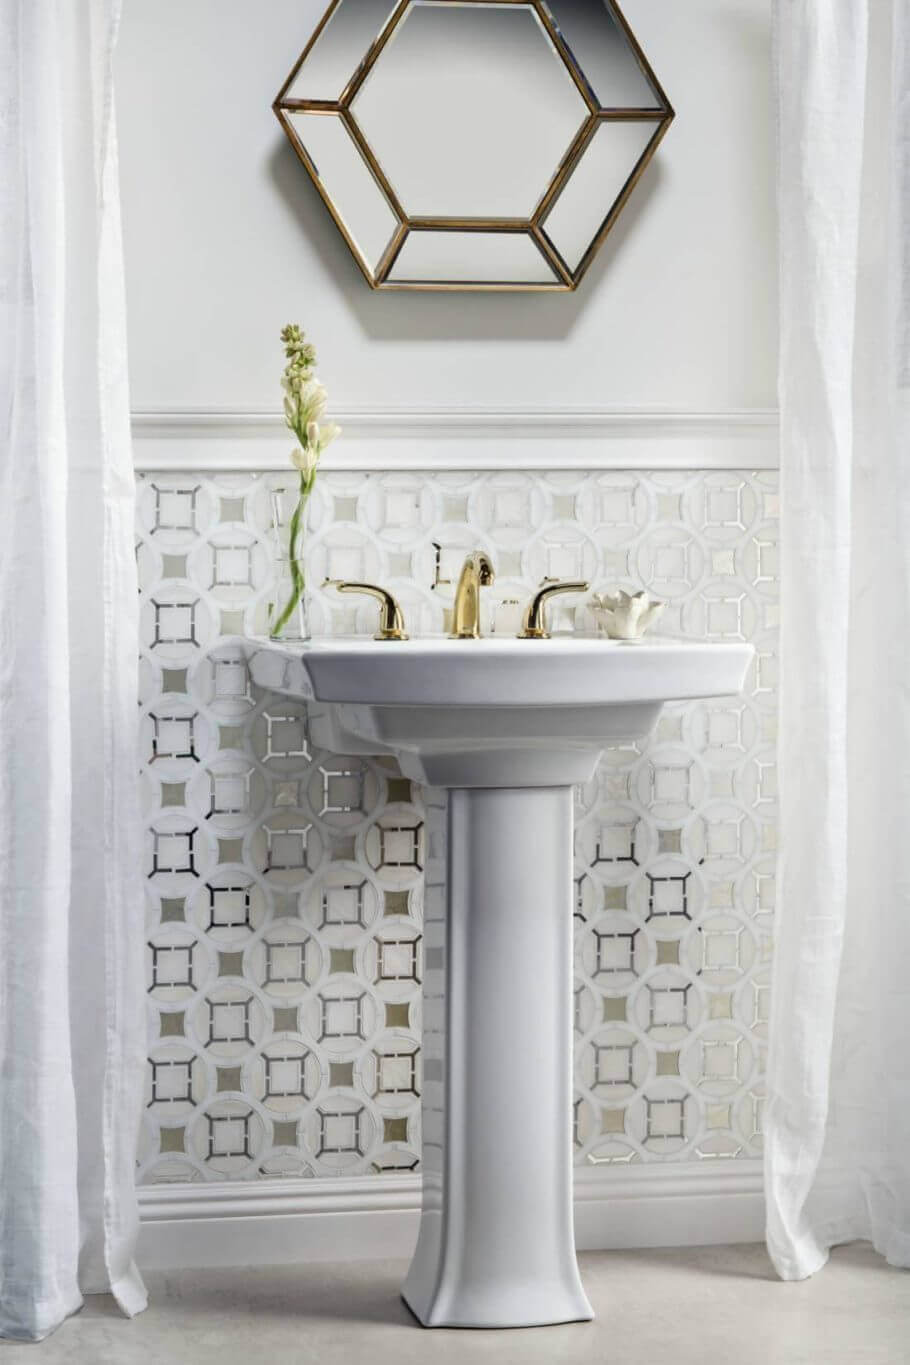 Powder room half wall tile with a silver design